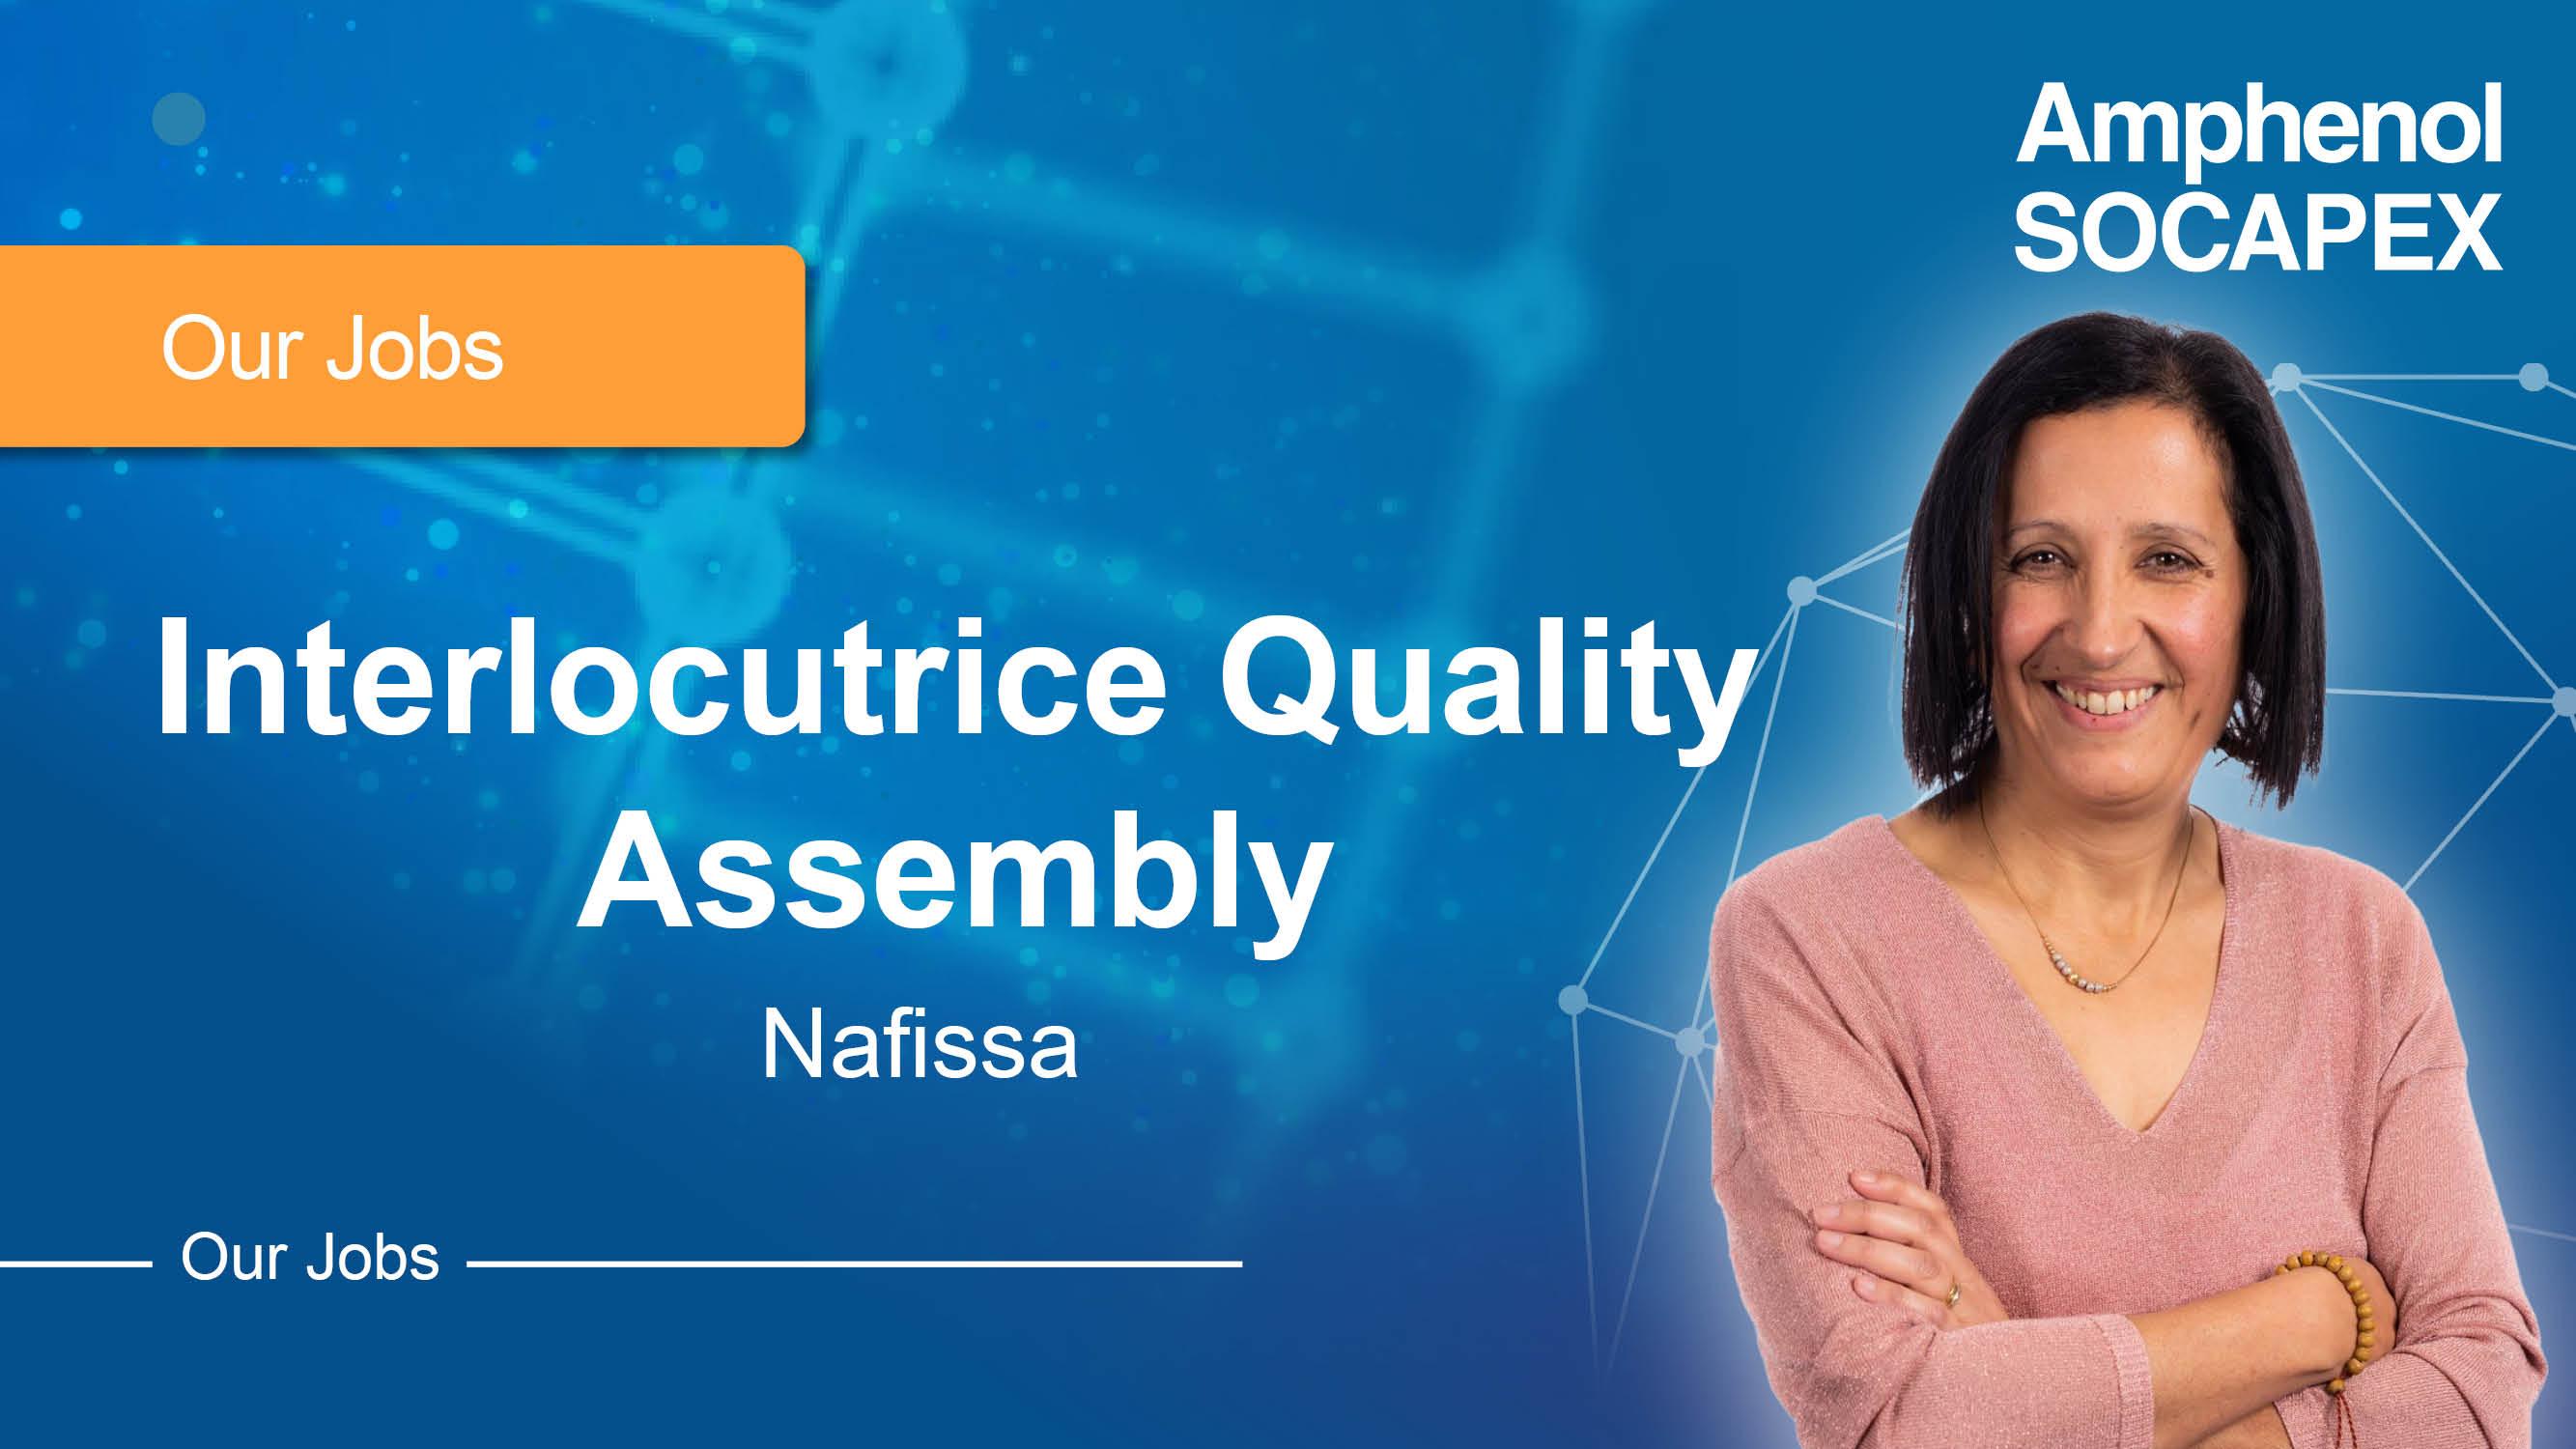 Interlocutrice Quality assembly